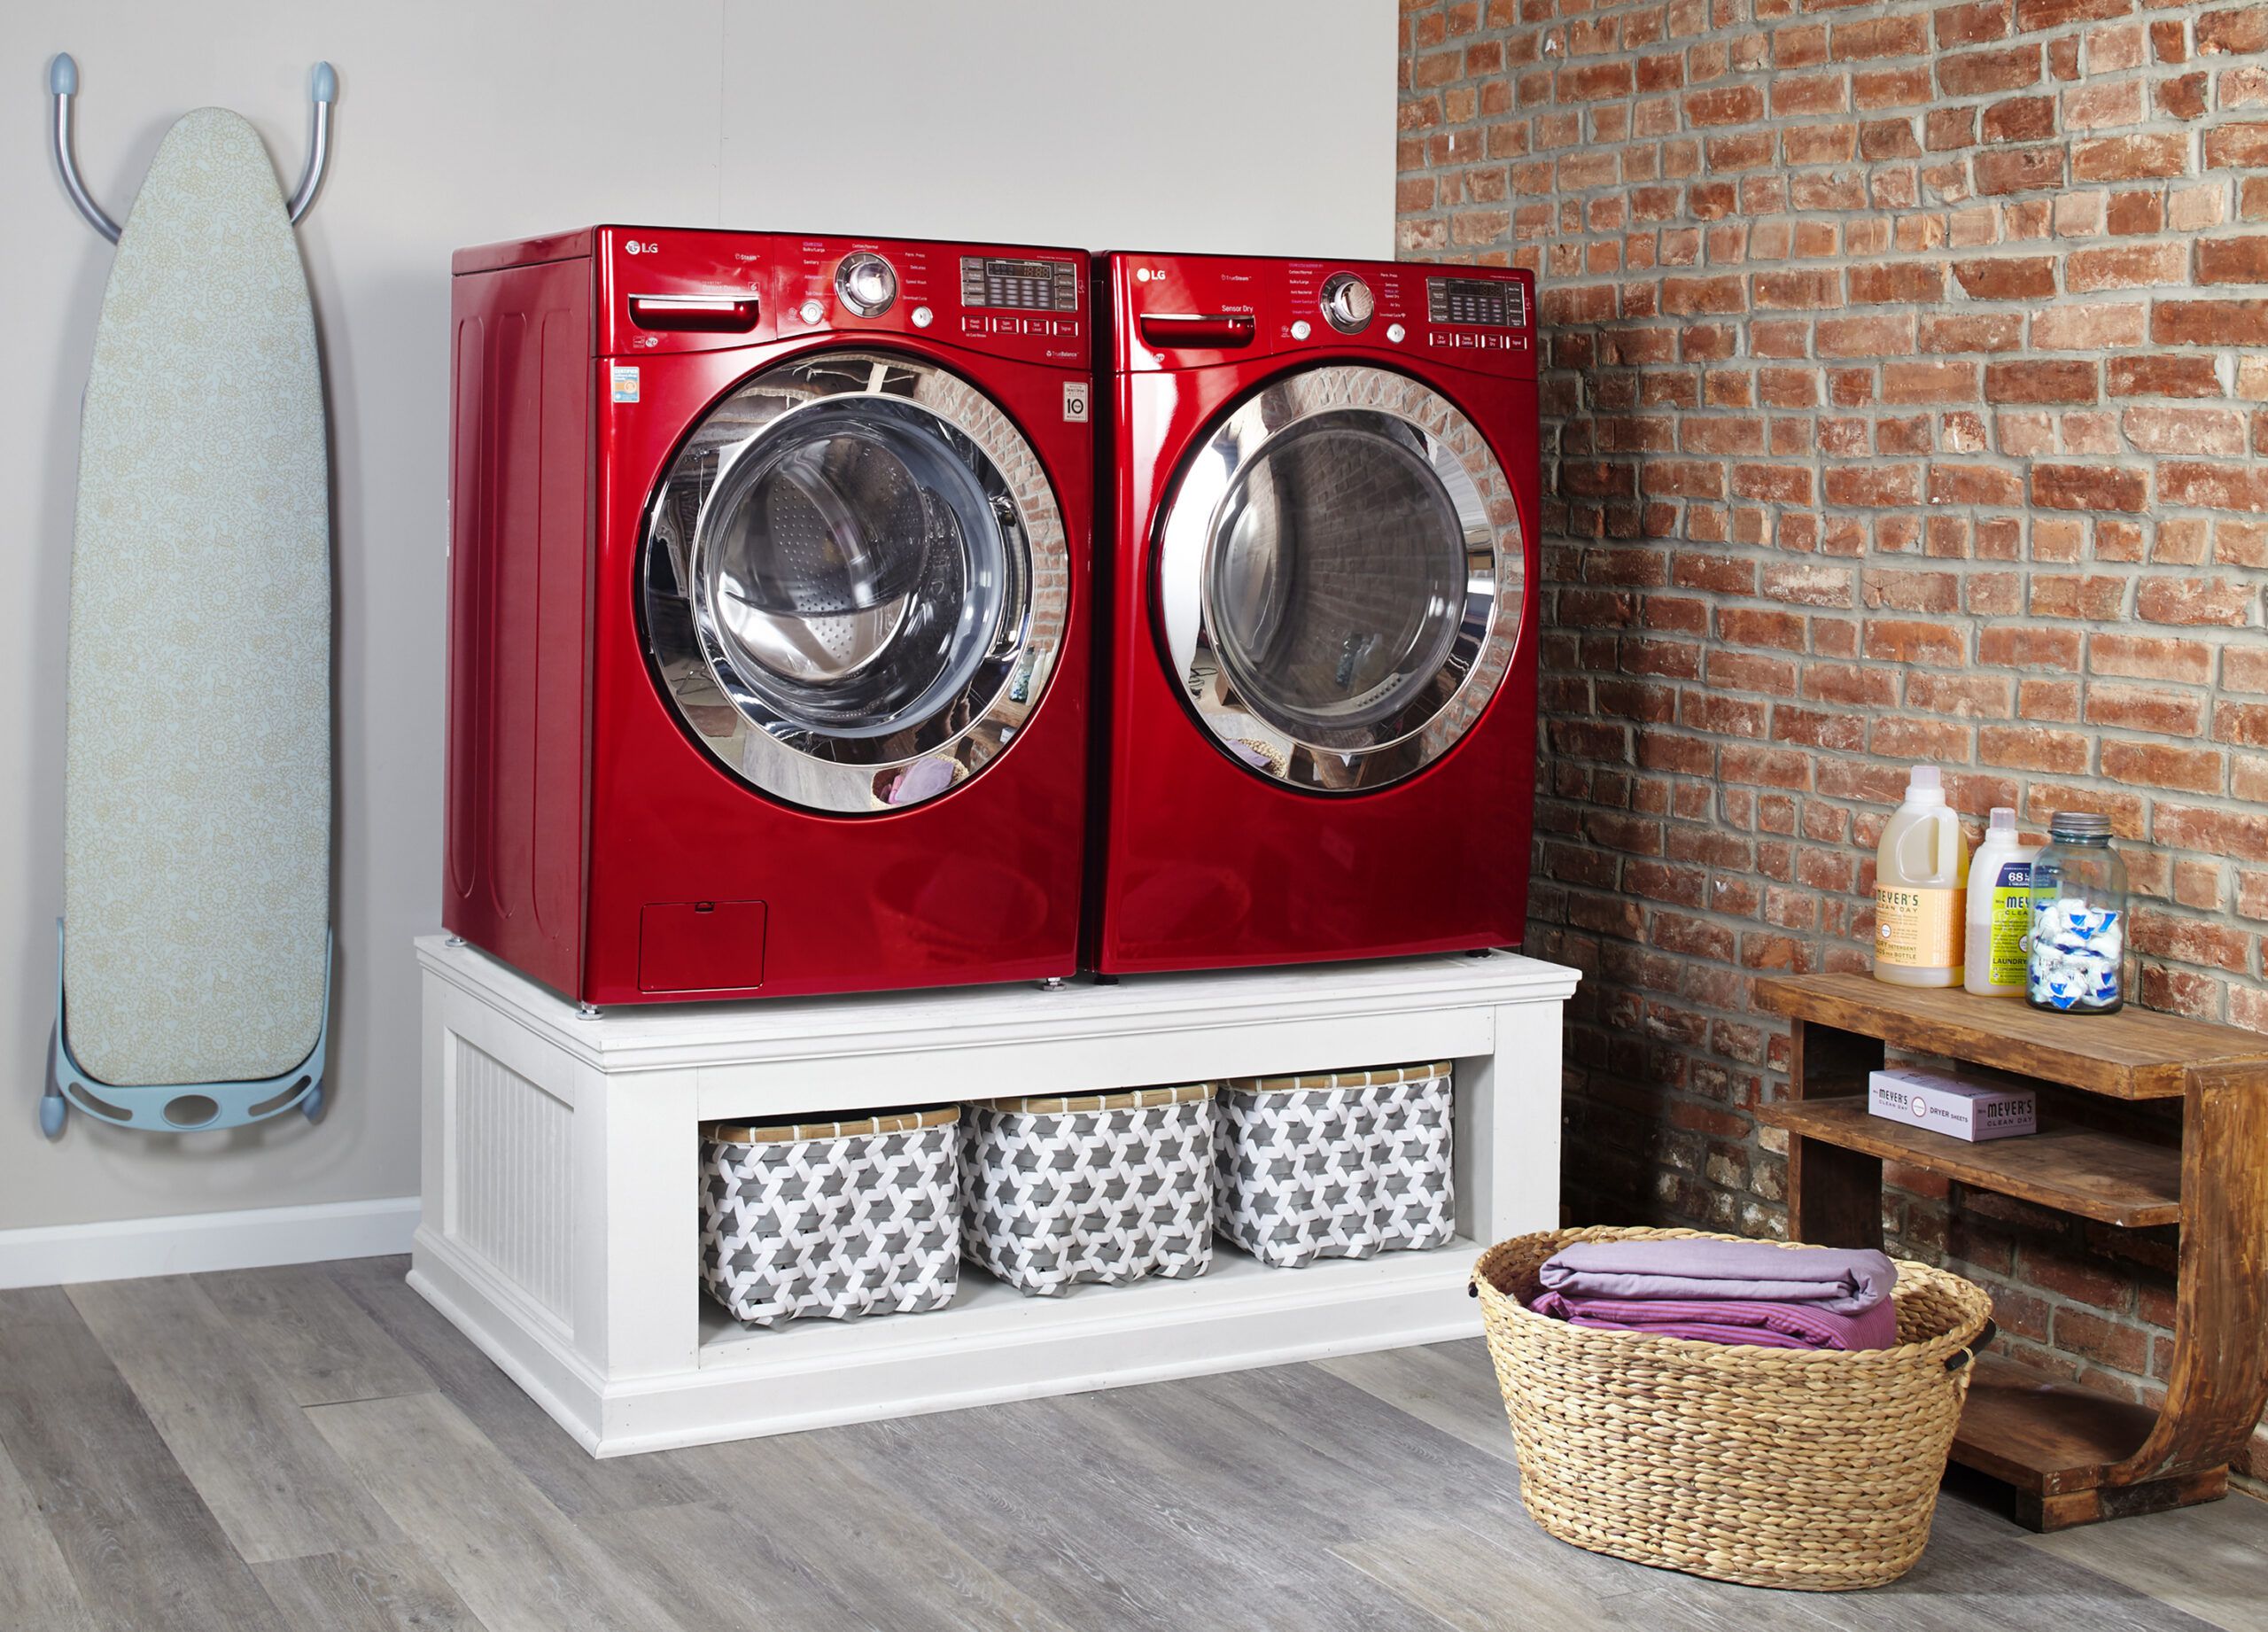 How To Build A Pedestal For Washer And Dryer